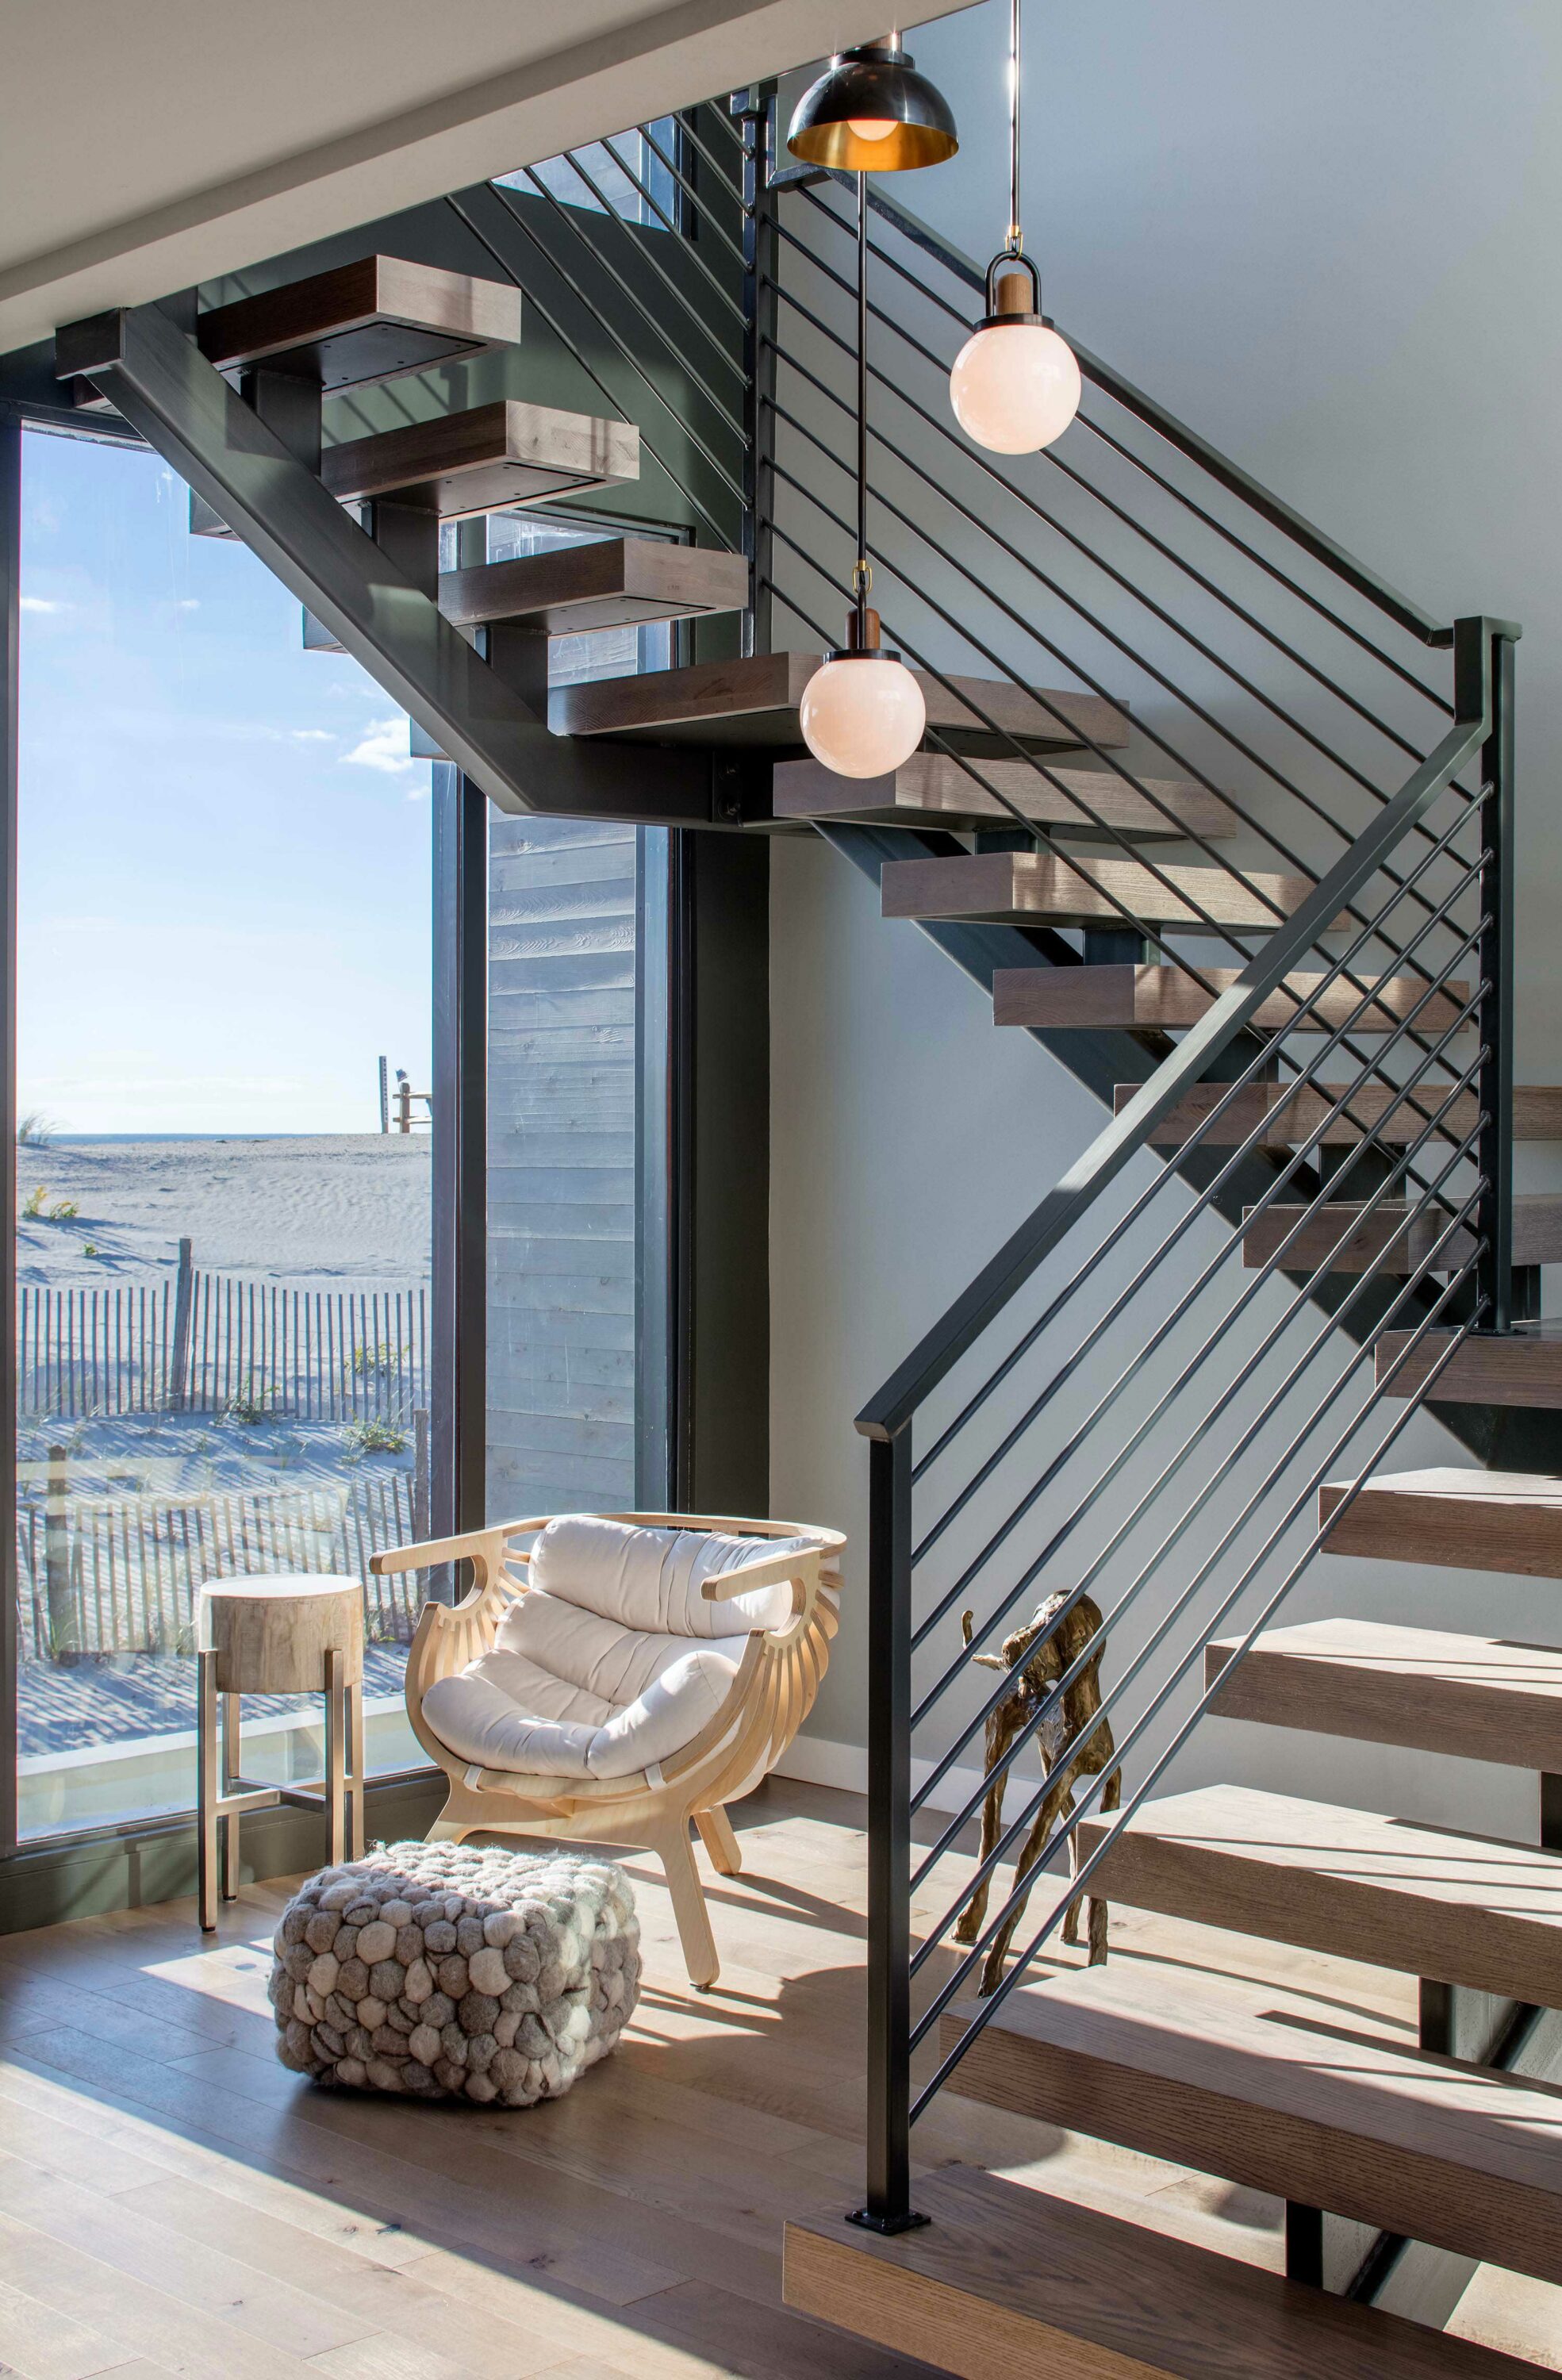 Interior photo of the Beach Haven Residence by Specht Novak Architects. Shot by Taggart Sorenson featuring brightly illuminated stairs with lounging area below them and a glass wall with views of the beach.